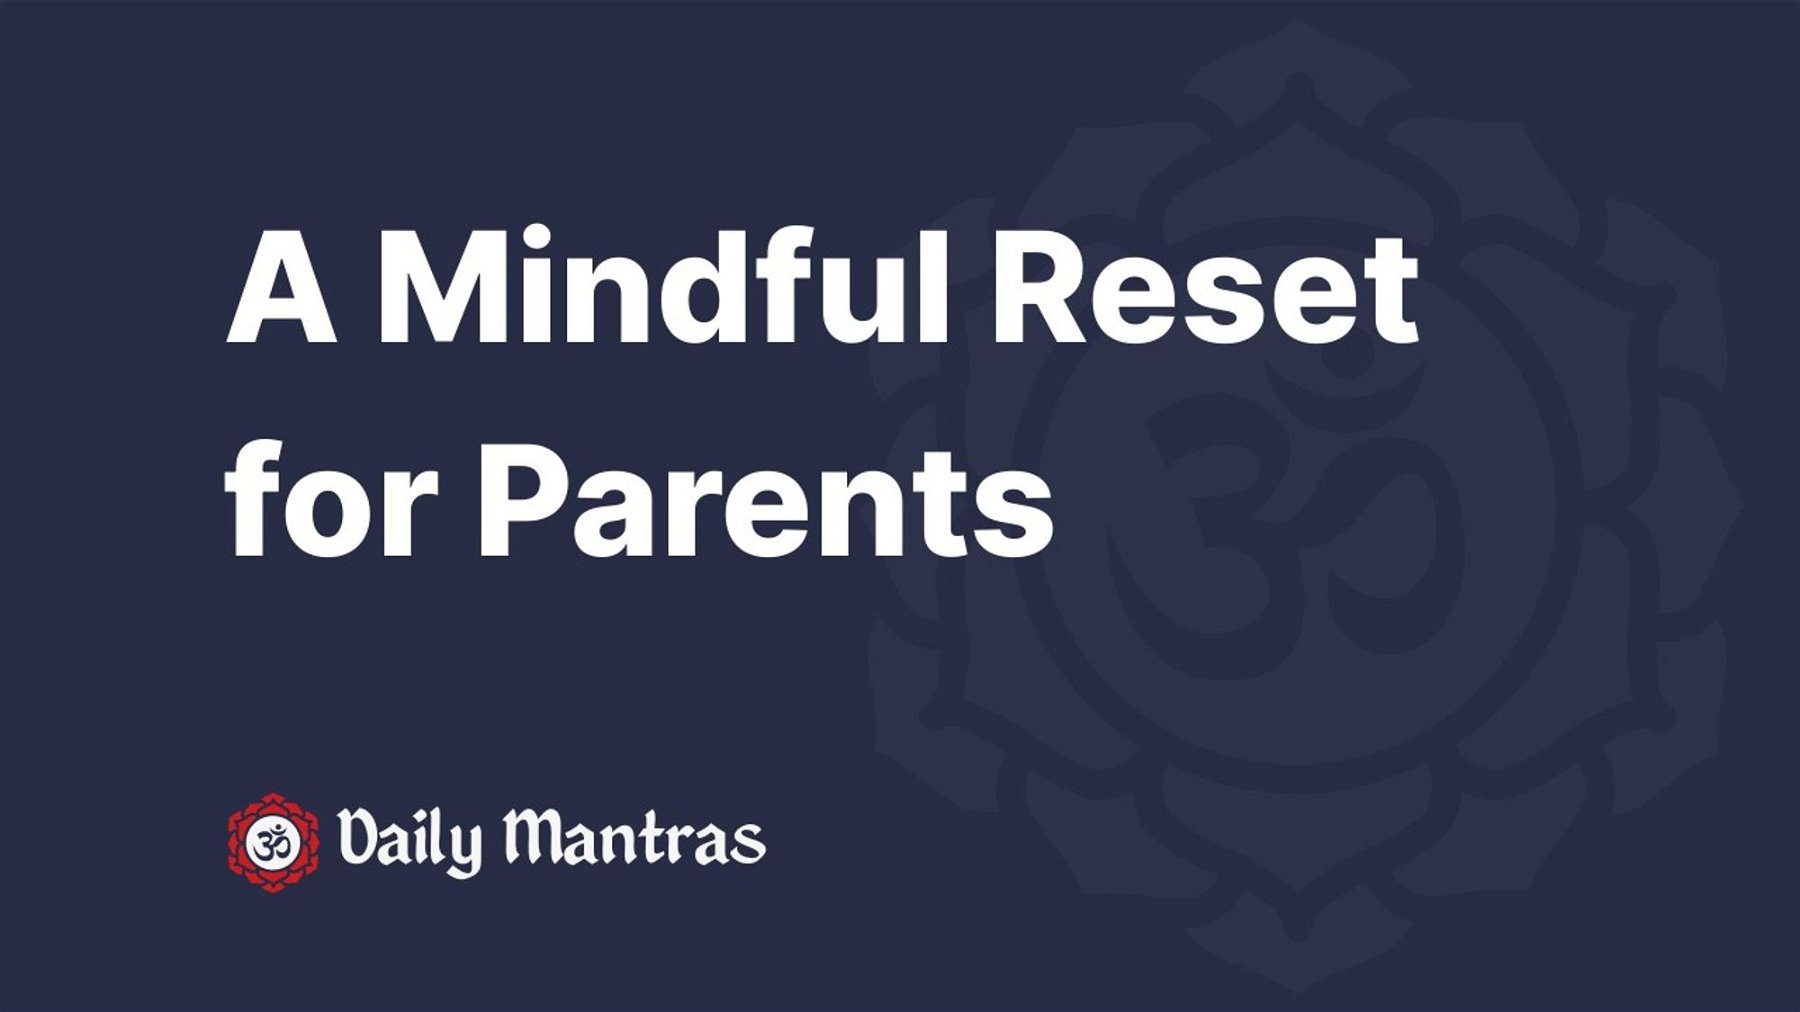 A Mindful Reset for Parents